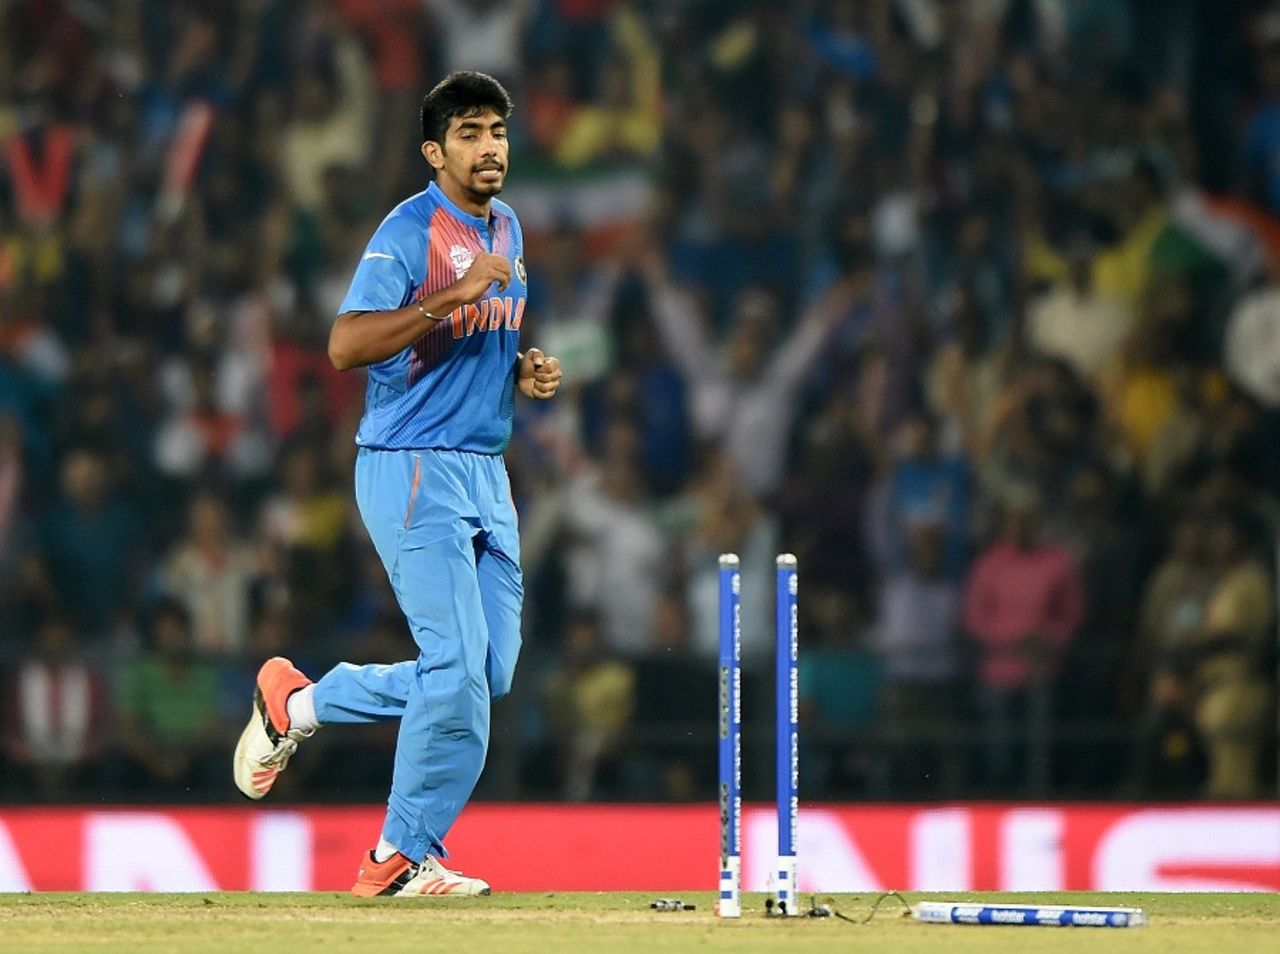 Jasprit Bumrah uprooted Corey Anderson's middle stump, India v New Zealand, World T20 2016, Group 2, Nagpur, March 15, 2016 